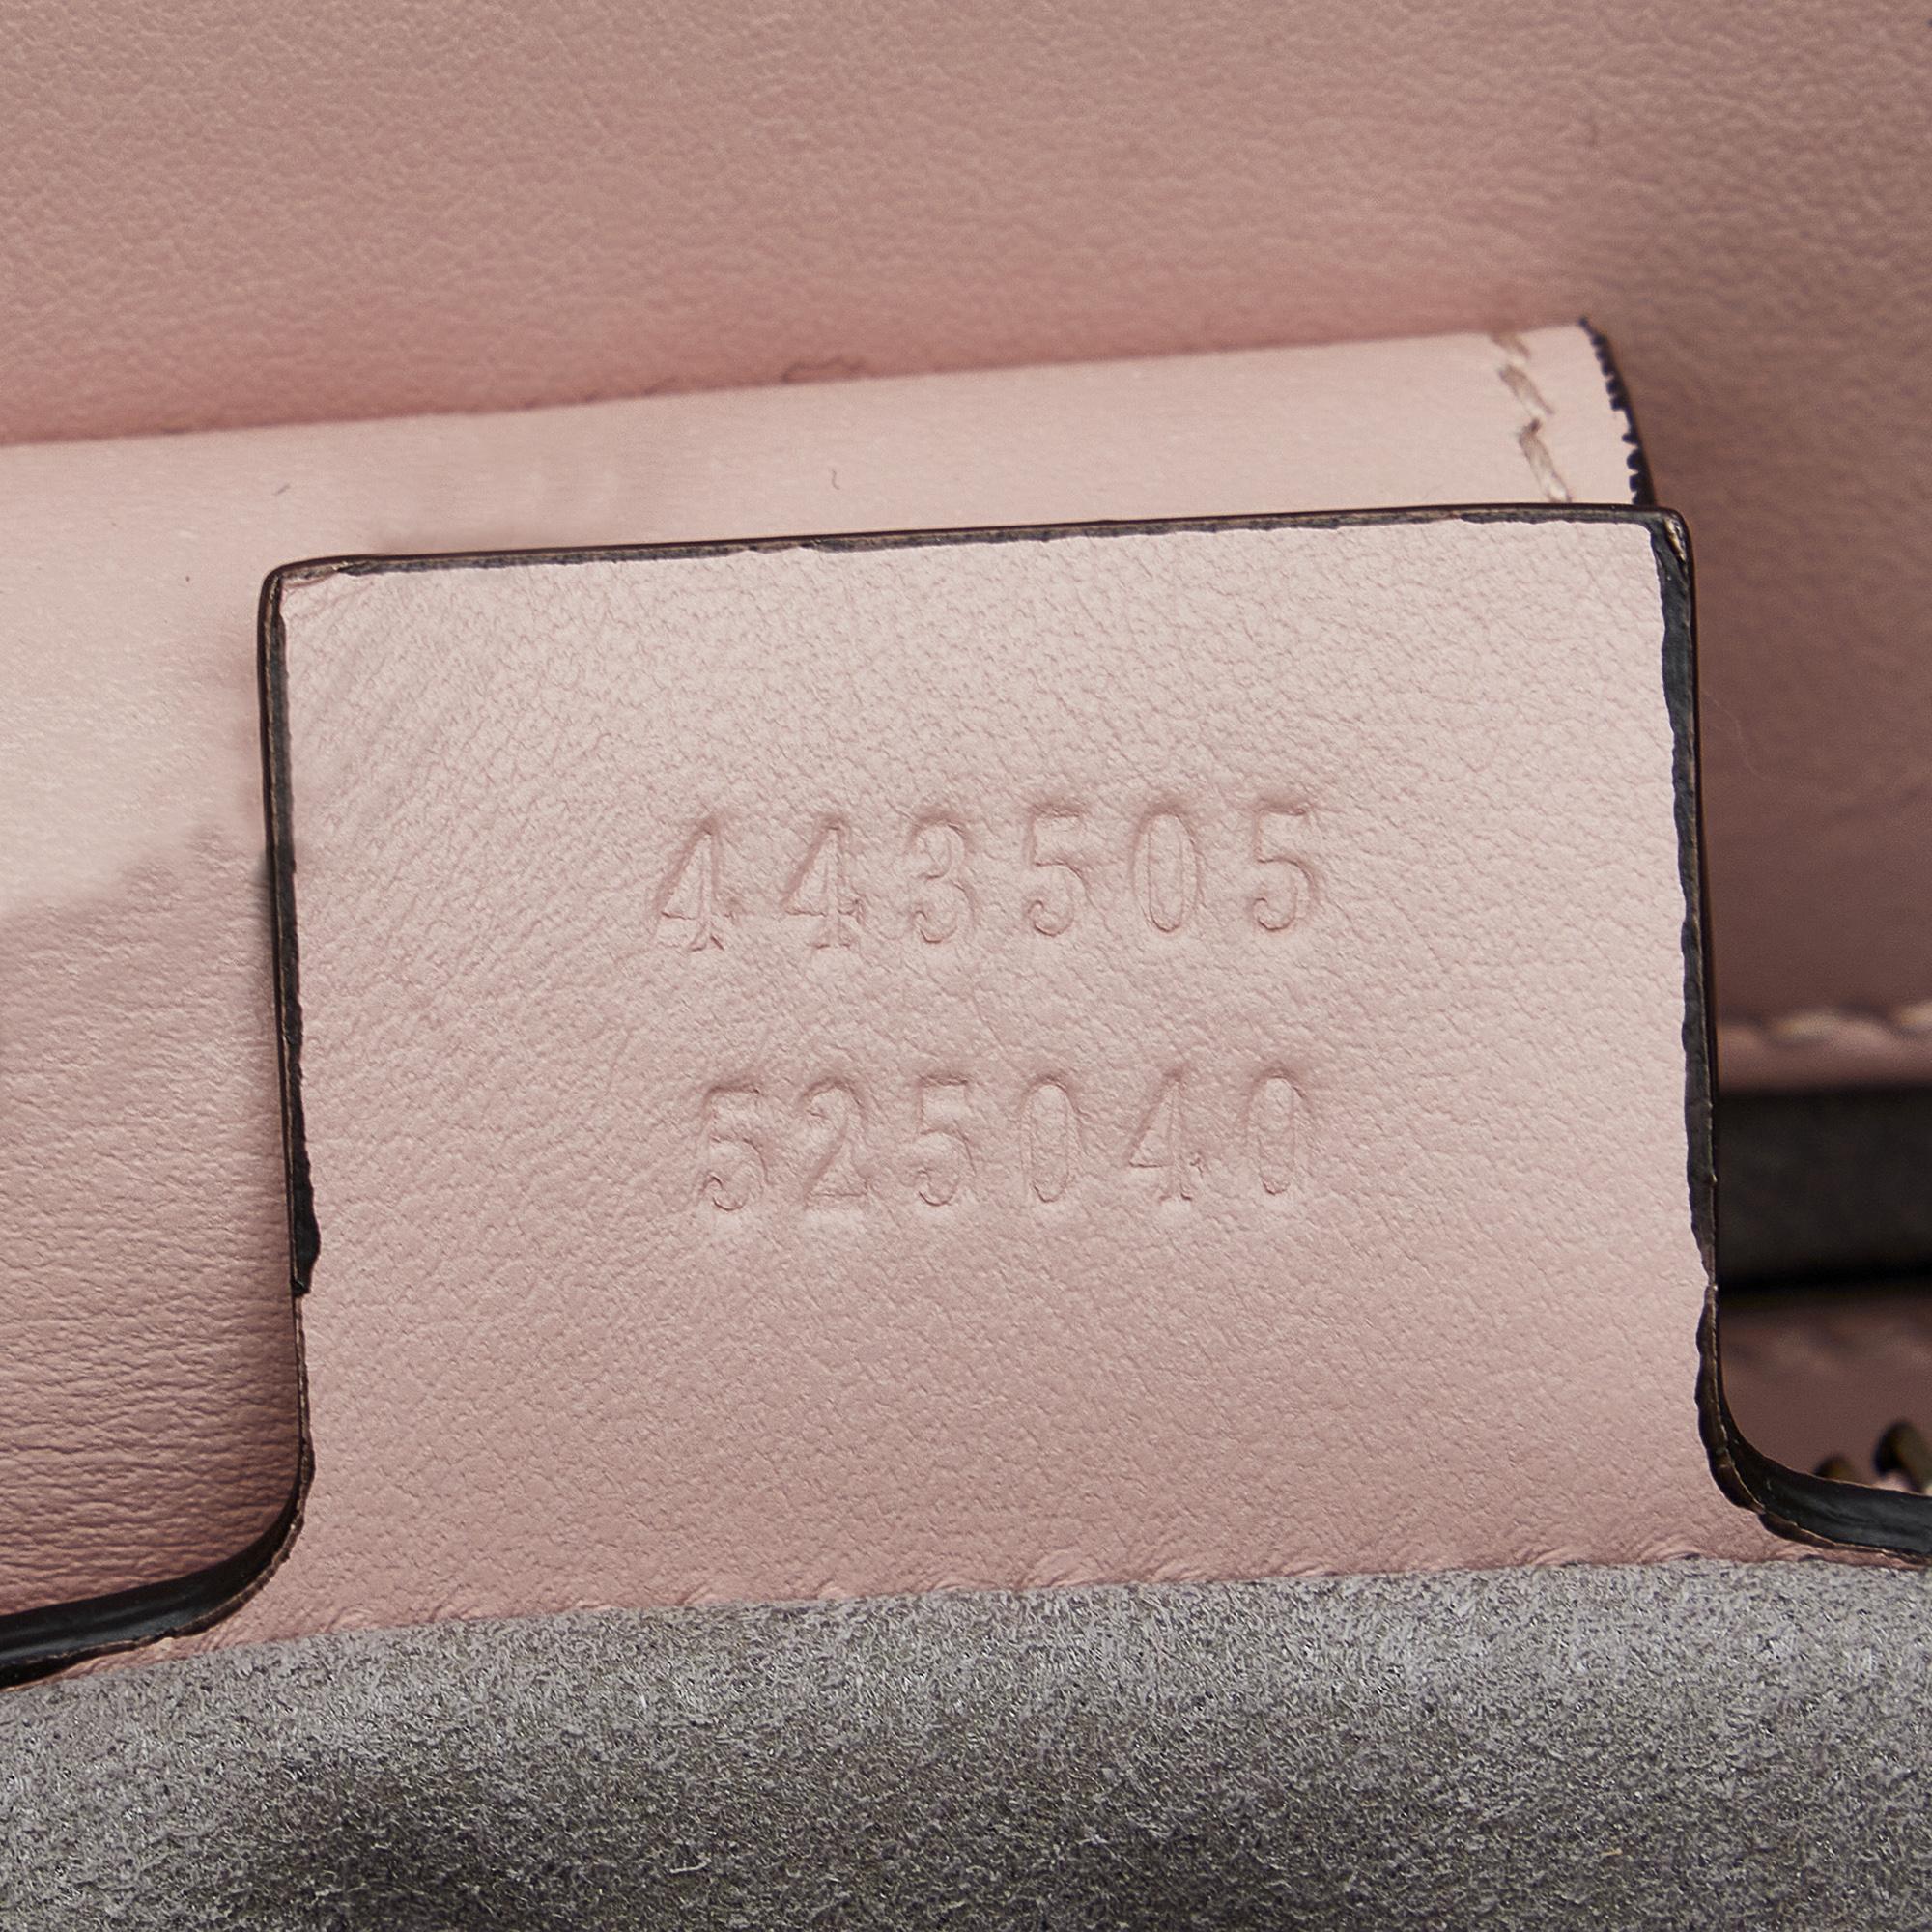 Gucci Pink GG Marmont Ghost Satchel